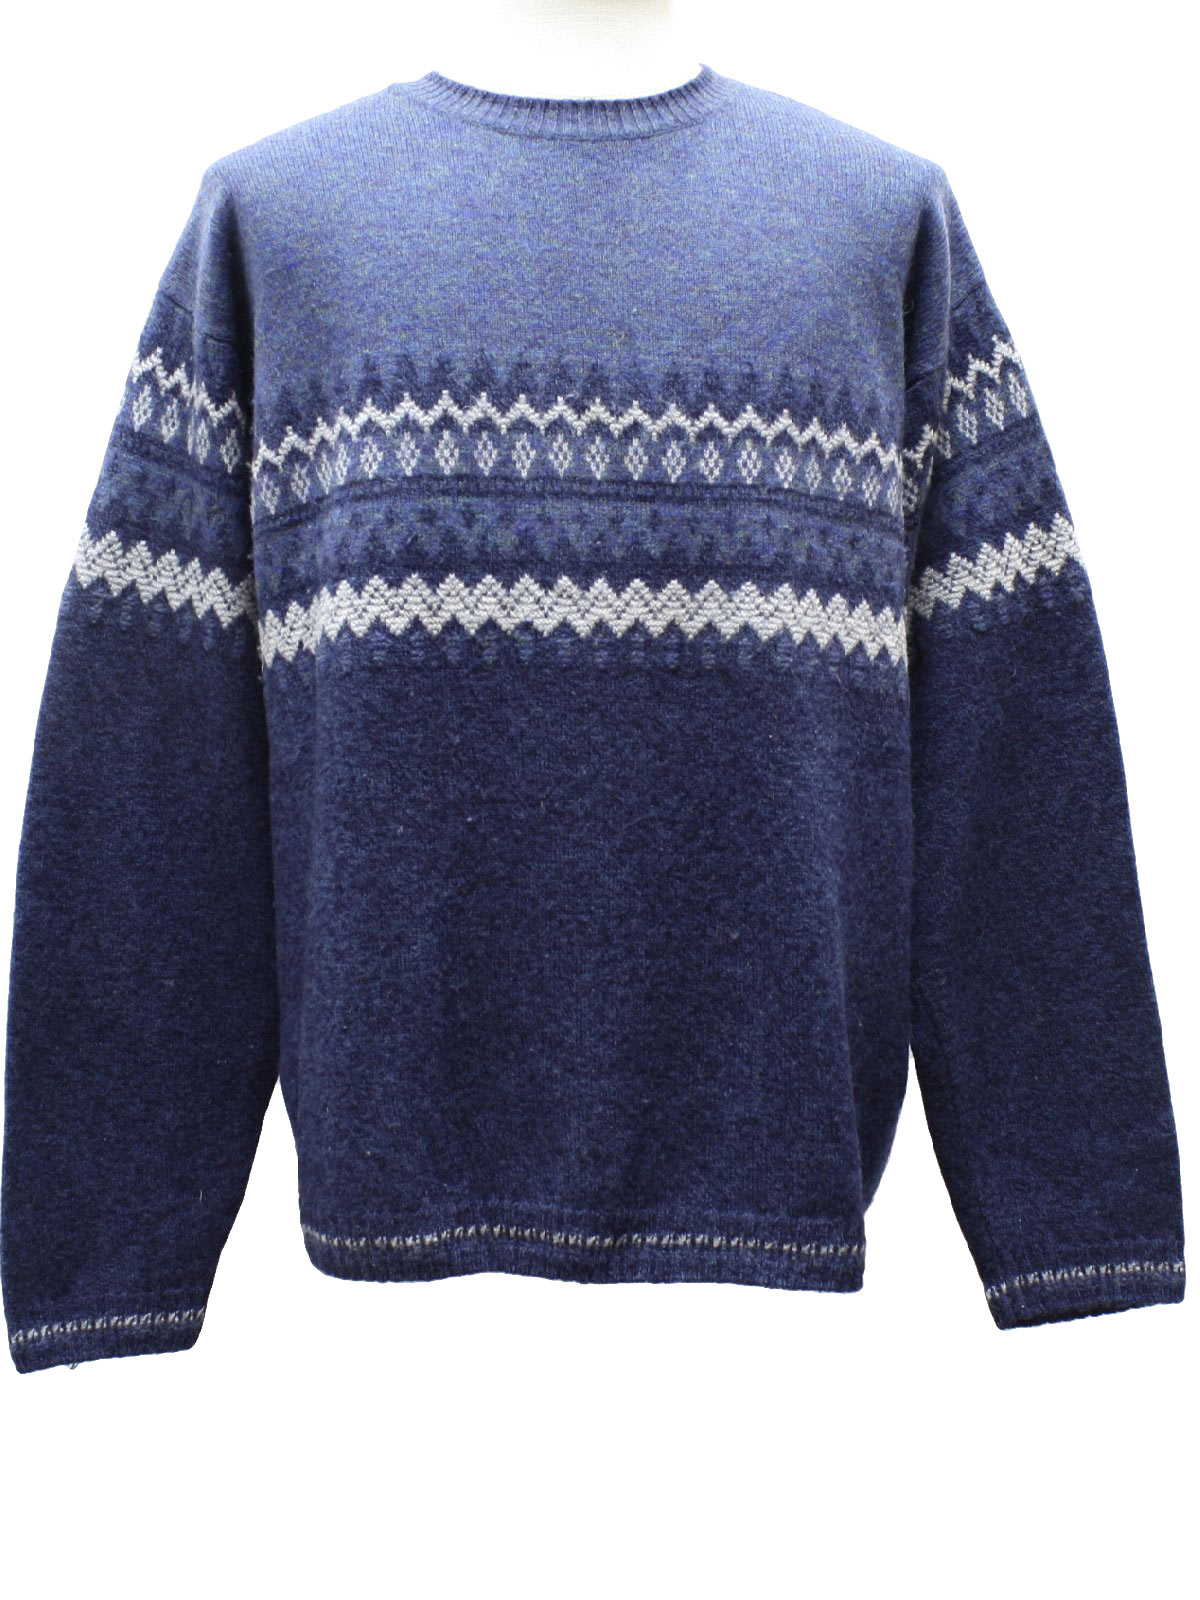 1980's Retro Sweater: Late 80s vintage -St Johns Bay- Mens blue with ...